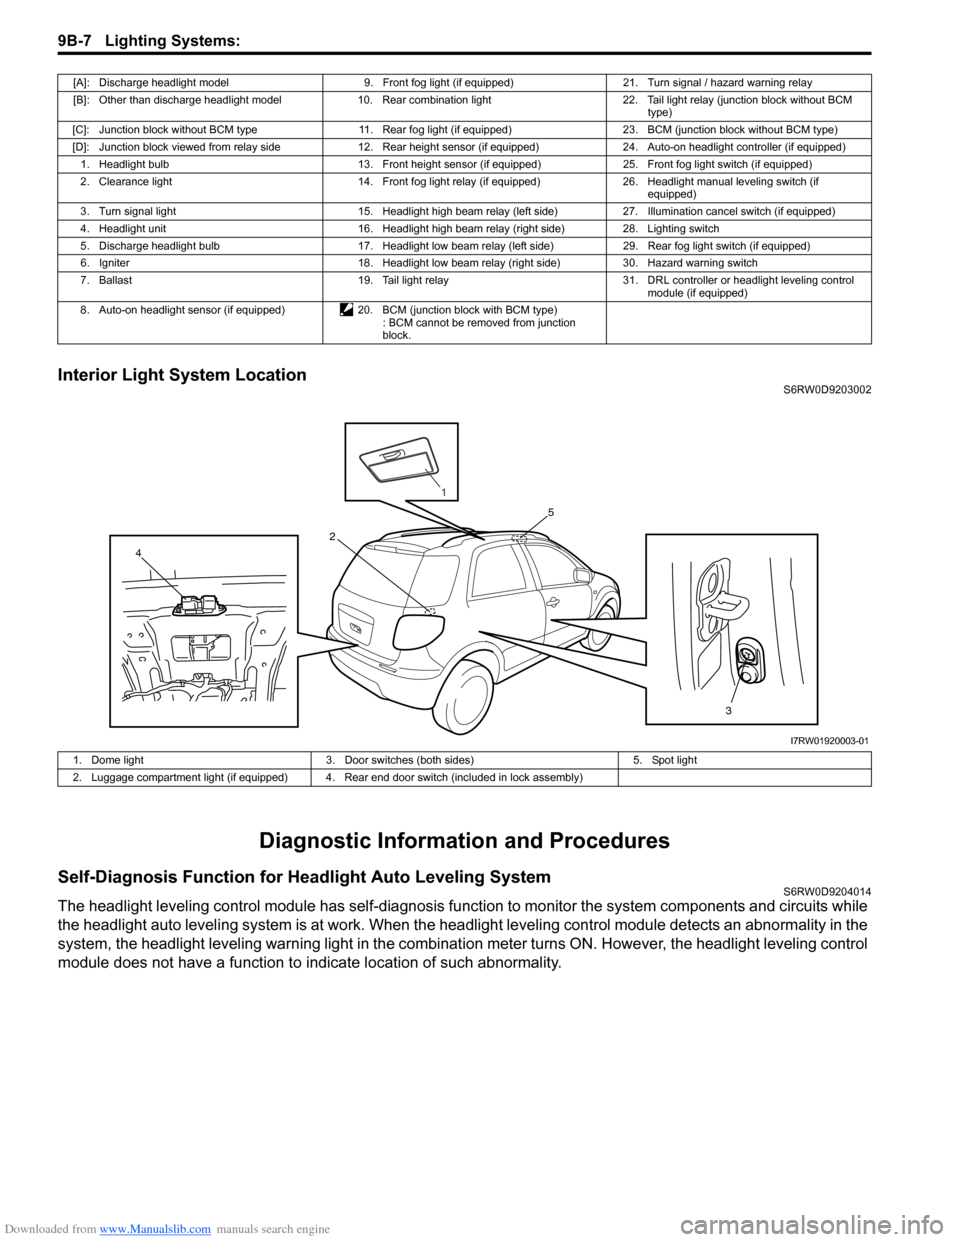 SUZUKI SX4 2006 1.G Service Workshop Manual Downloaded from www.Manualslib.com manuals search engine 9B-7 Lighting Systems: 
Interior Light System LocationS6RW0D9203002
Diagnostic Information and Procedures
Self-Diagnosis Function for Headlight